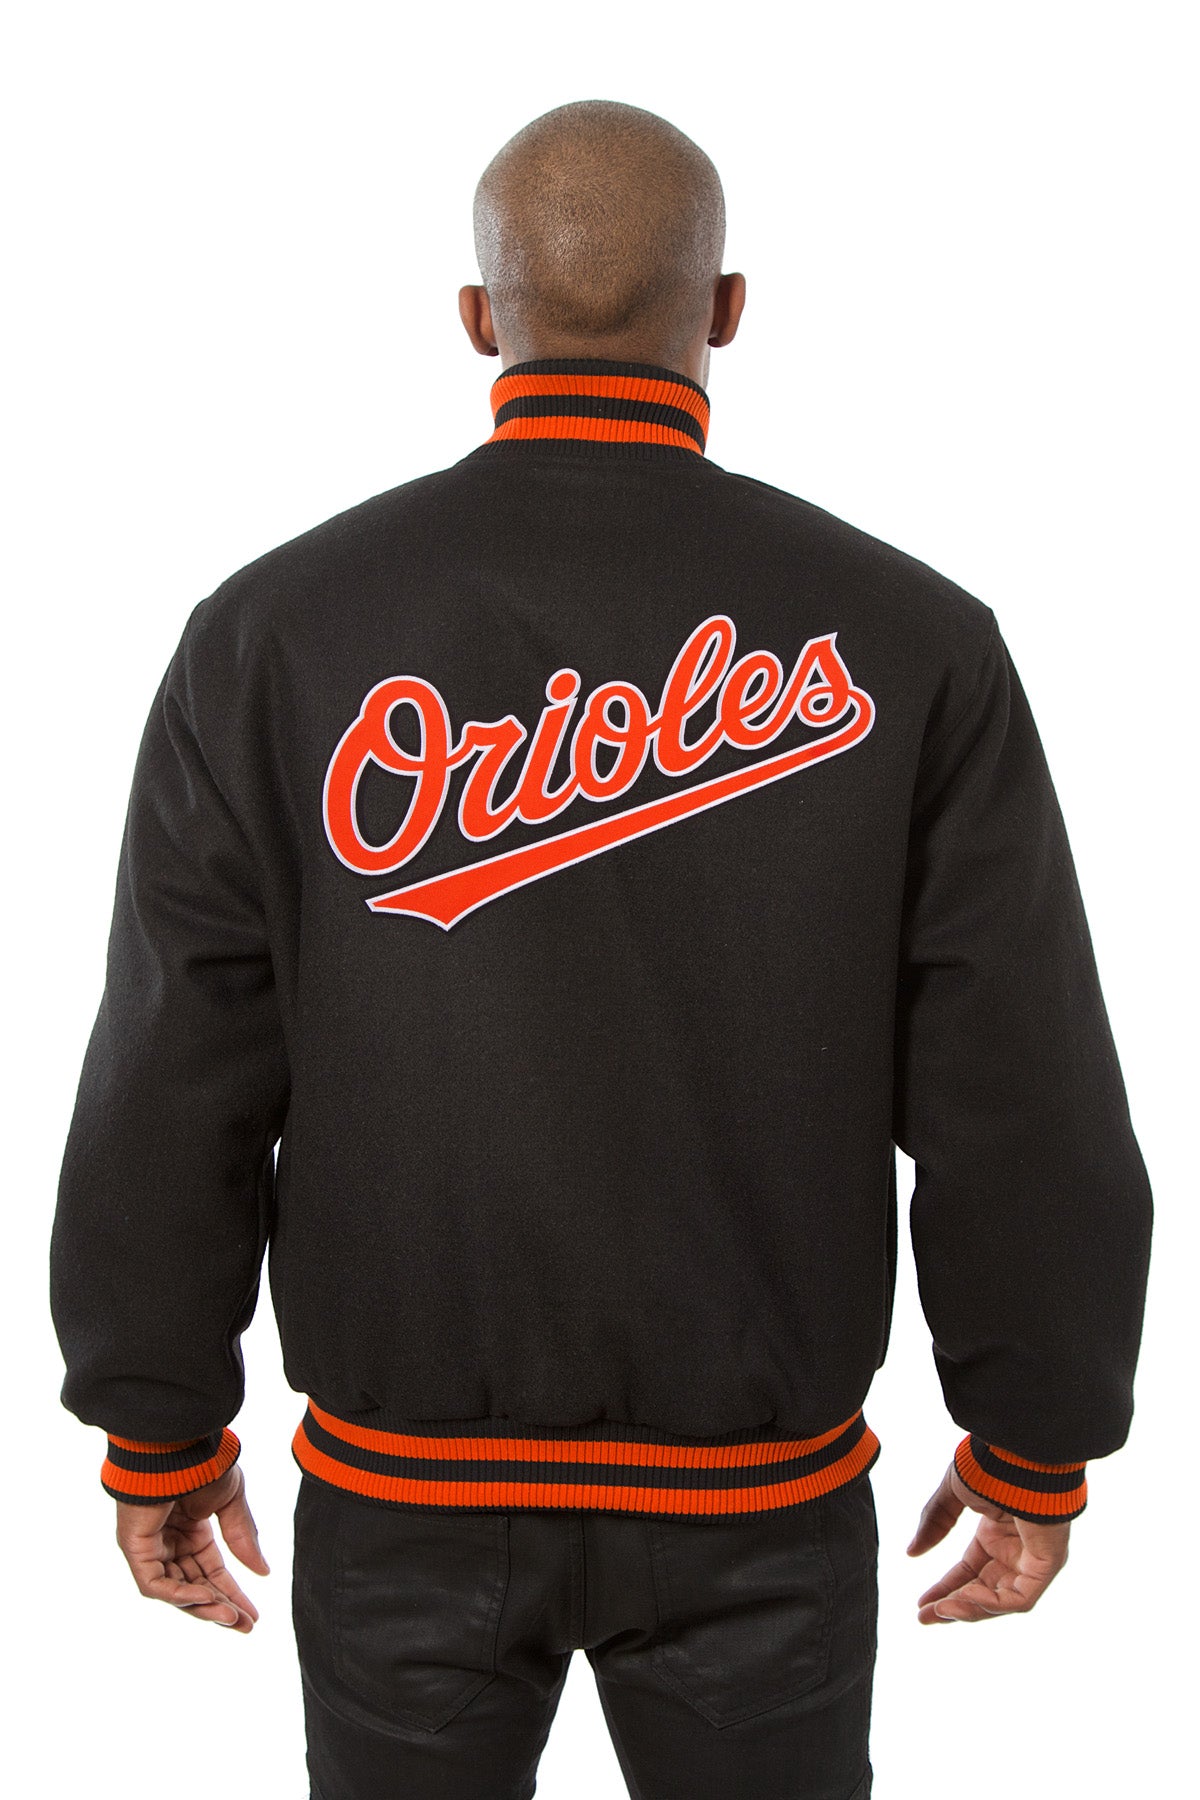 Baltimore Orioles Embroidered Wool Jacket